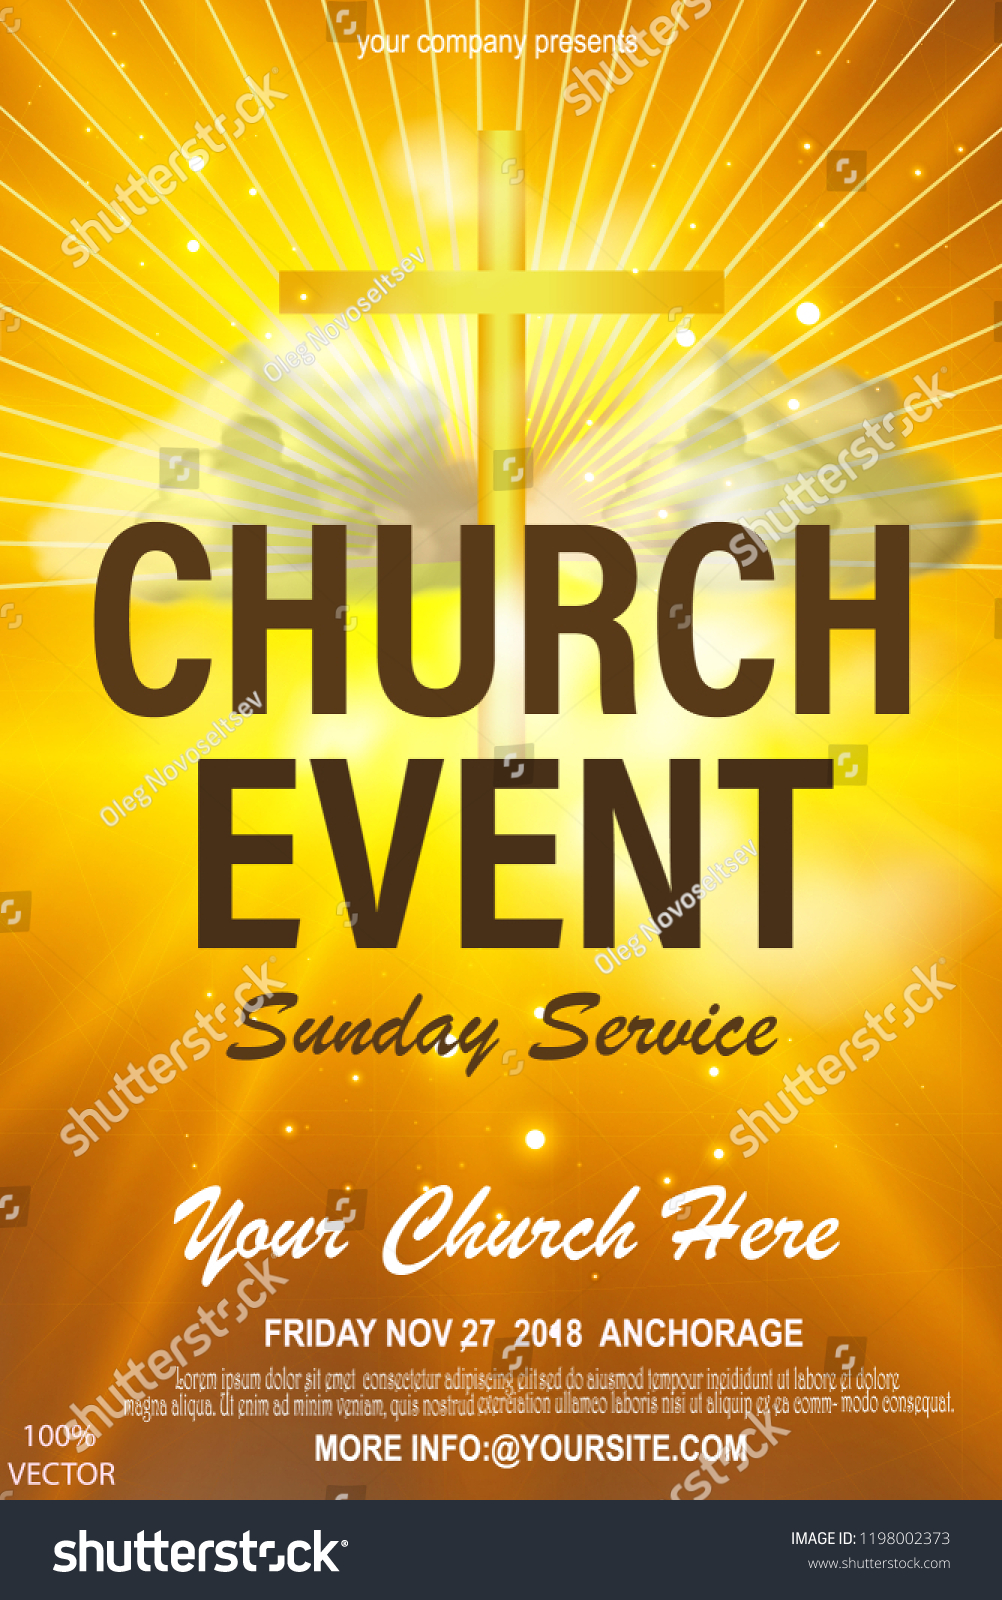 Christian Invitation Poster Template Religious Flyer Stock Vector Royalty Free 1198002373 Background church church background flyers church flyers flyers background flyer decoration template modern abstract cover decorative colorful brochure decor backdrop vector background style party layout poster leaflet business ornament banner booklet element blue card bright music fine. https www shutterstock com image vector christian invitation poster template religious flyer 1198002373